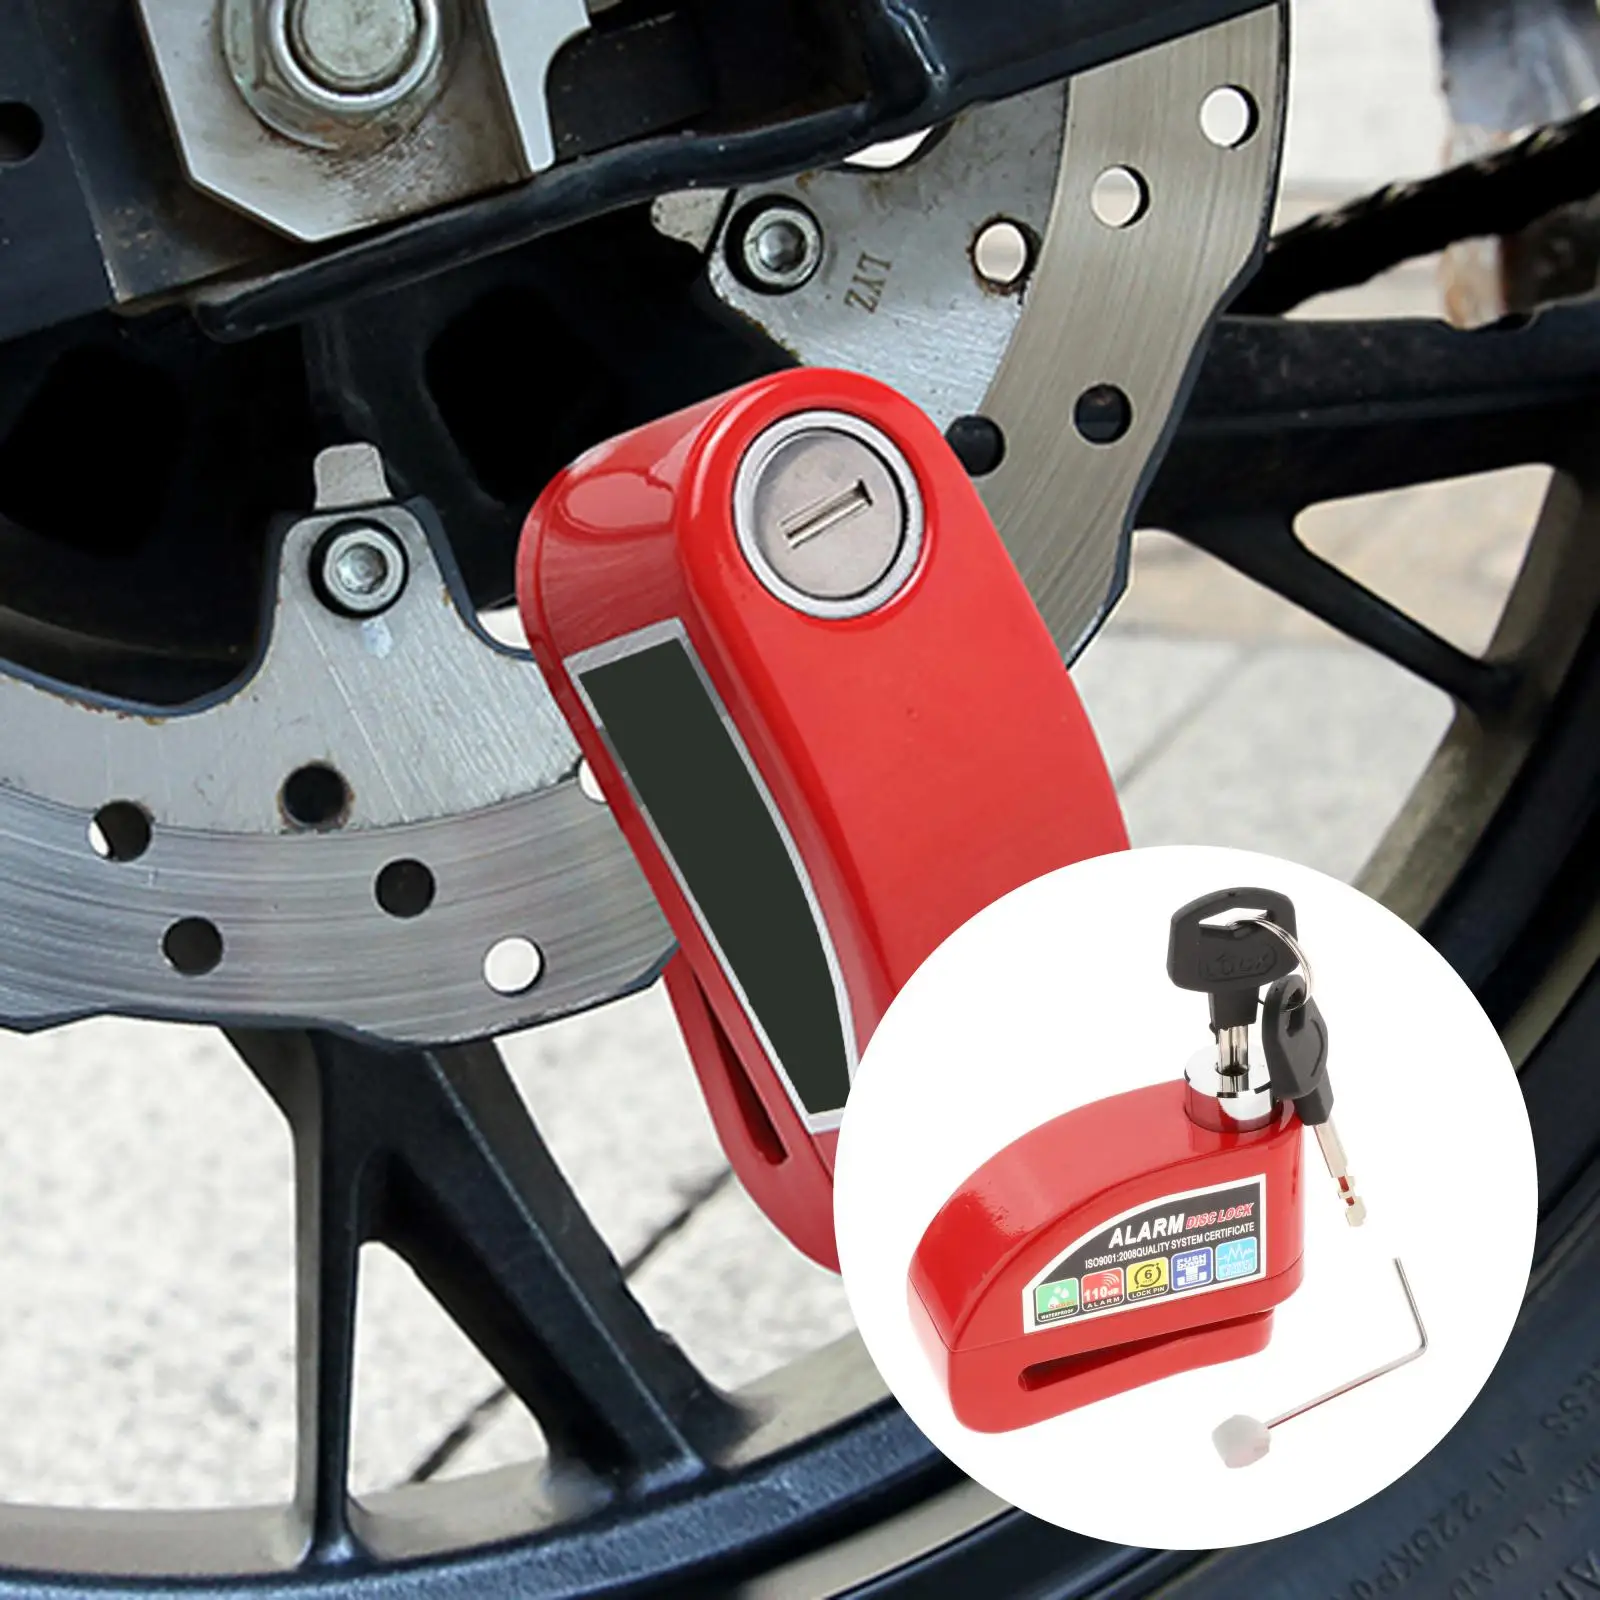 Motorcycle Disc Lock Heavy Duty with Alarm 110dB 6mm Pin Disc Brake Lock for MTB Scooter Bike Theft Prevention